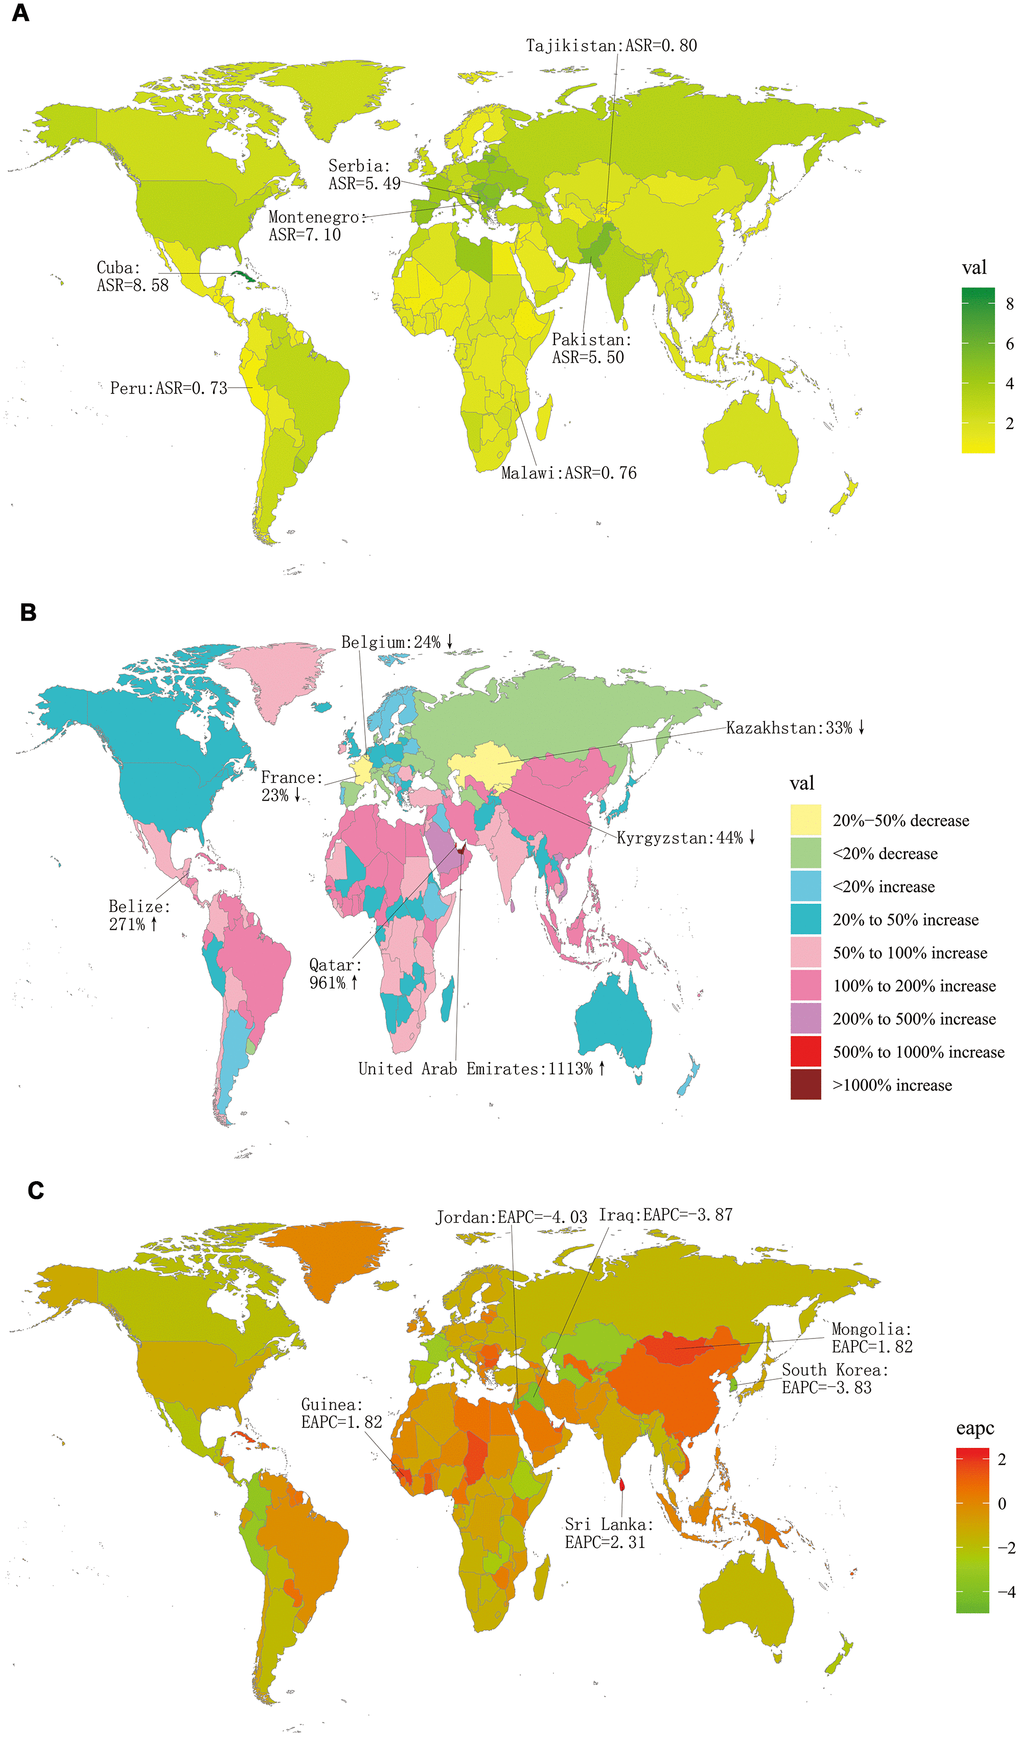 The global incidence burden of larynx cancer in 195 countries. (A) The ASIR of larynx cancer in 2017; (B) The relative change in incident cases of larynx cancer between 1990 and 2017; (C) The EAPC of larynx cancer ASIR from 1990 to 2017. Countries with an extreme number of cases/evolution were annotated. ASIR, age-standardized incidence rate; EAPC, estimated annual percentage change.